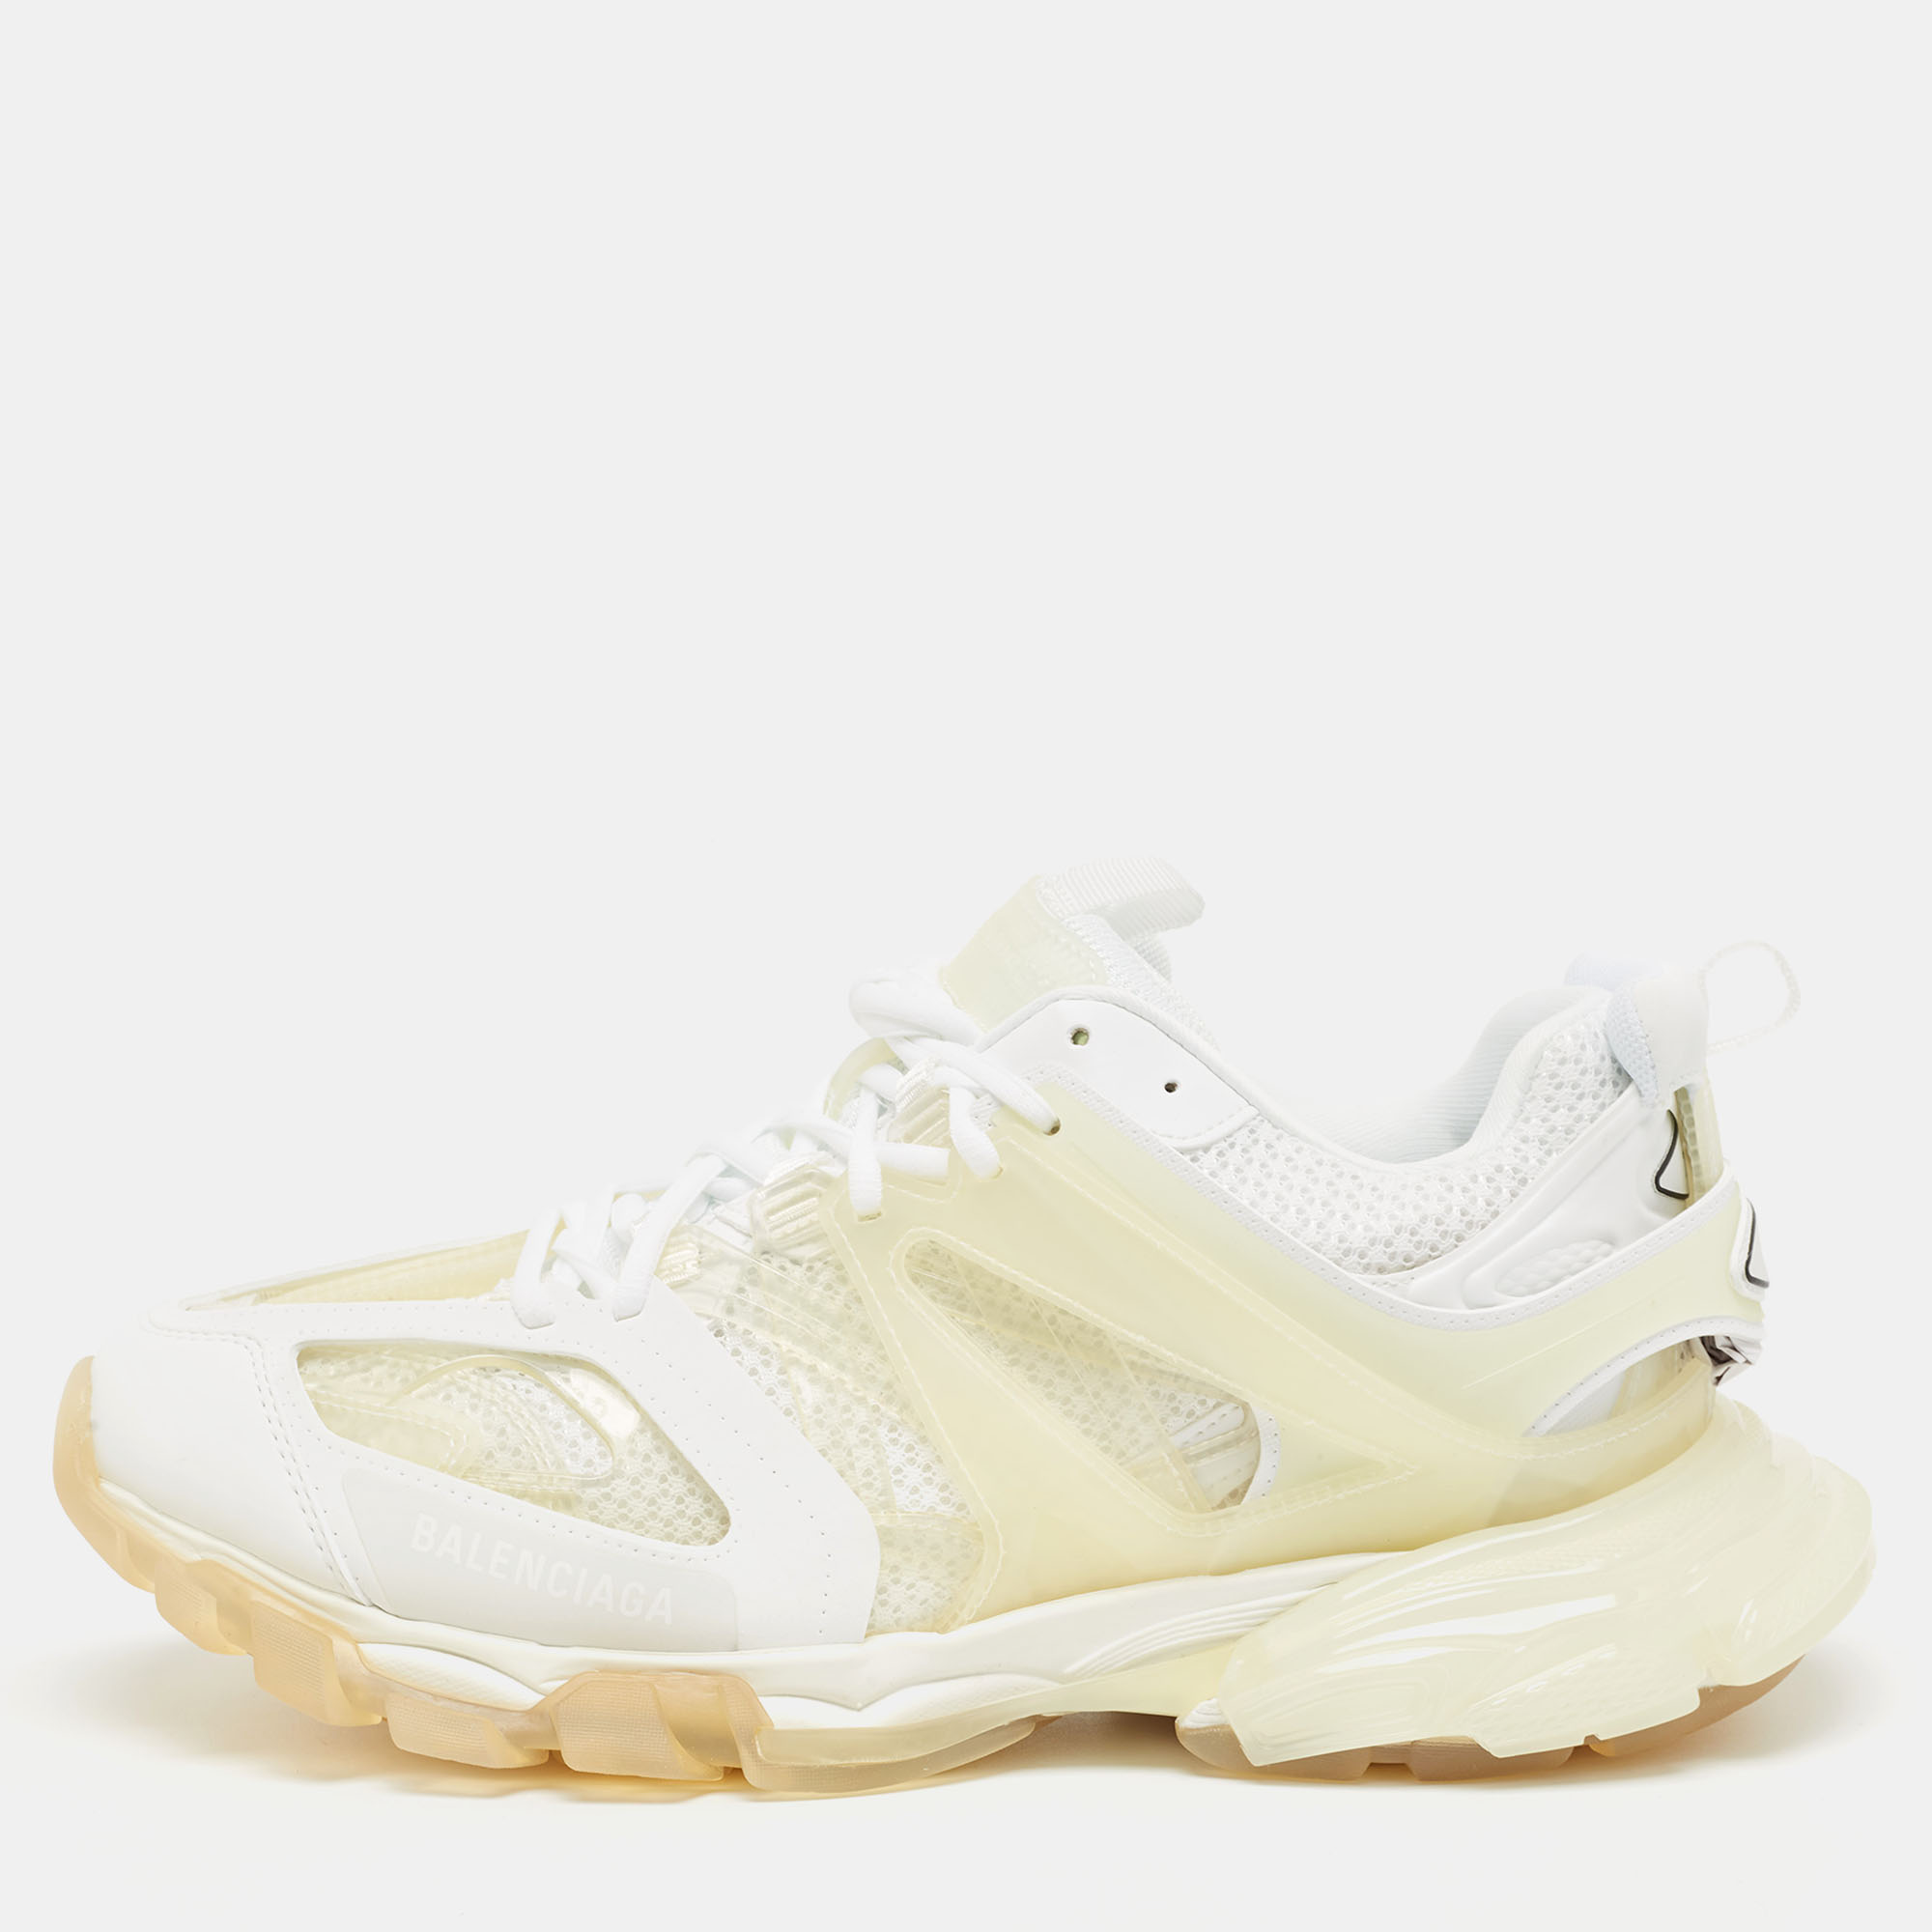 Balenciaga White/Transparent Leather And PVC Track Clear Sole Sneakers Size 44